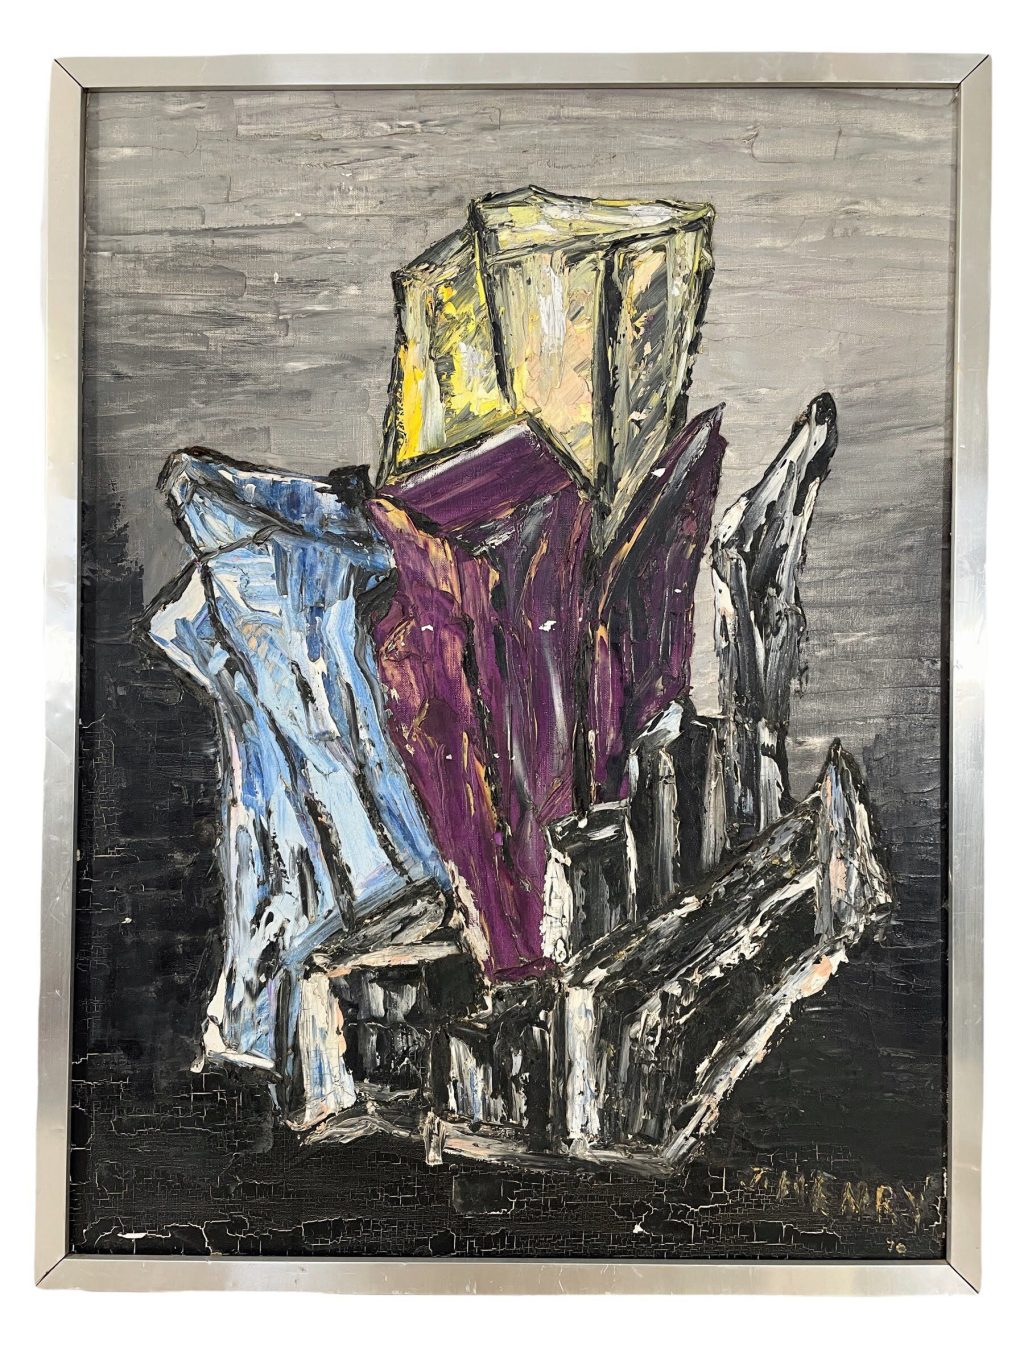 Vintage French Abstract Brutalist Purple Blue Black Grey Oil Painting On Board Signed I Henry 70 circa 1970’s